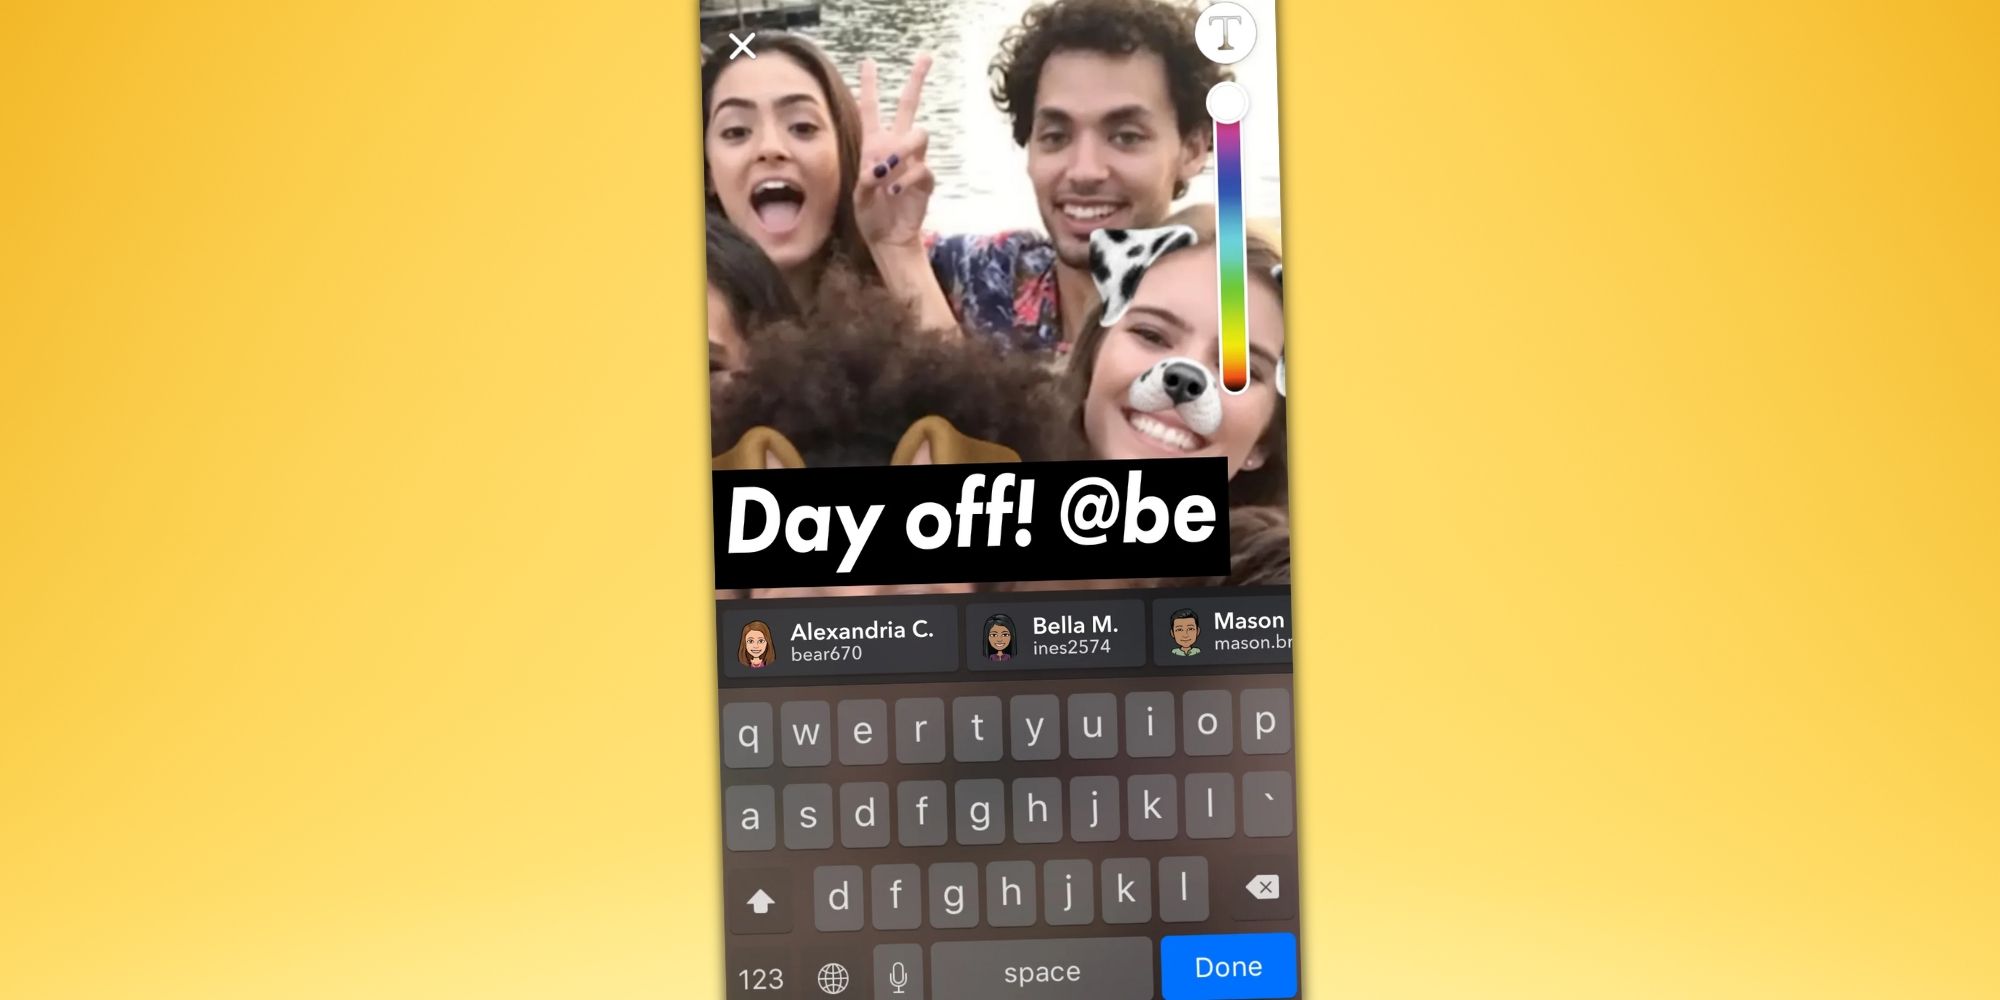 Screenshot of the Snapchat Mentions feature